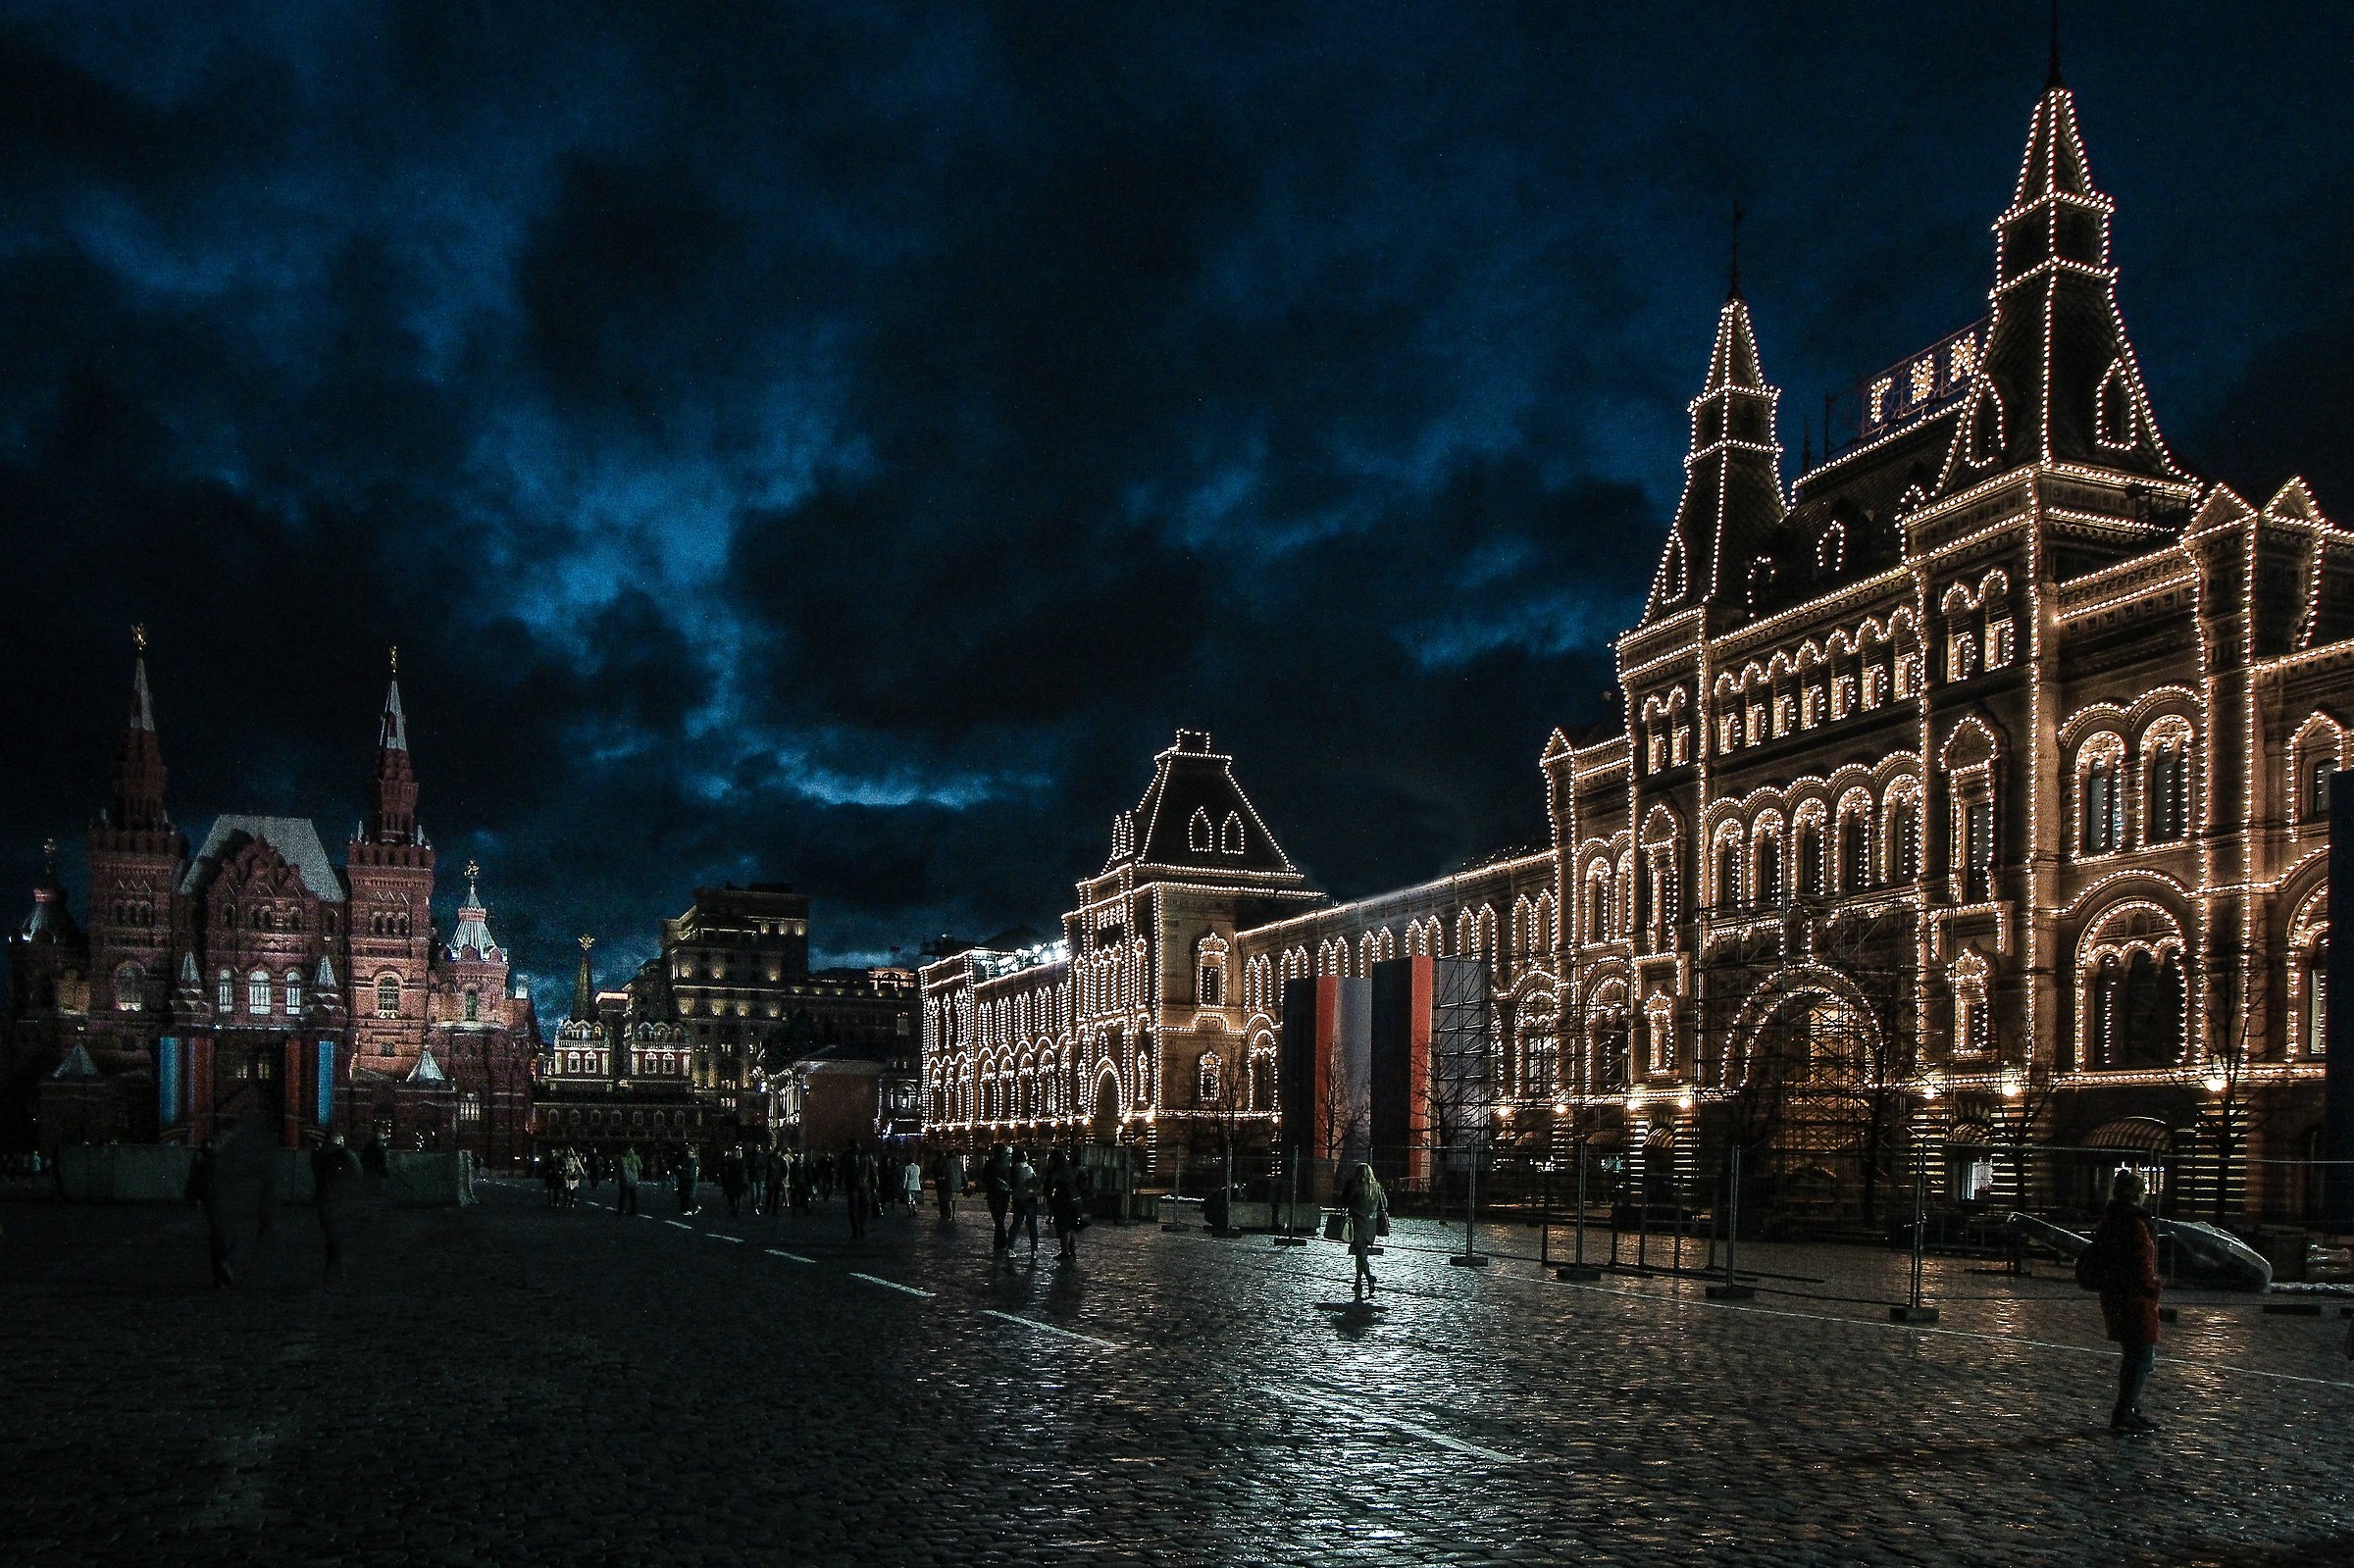 Nightly in Red Square...